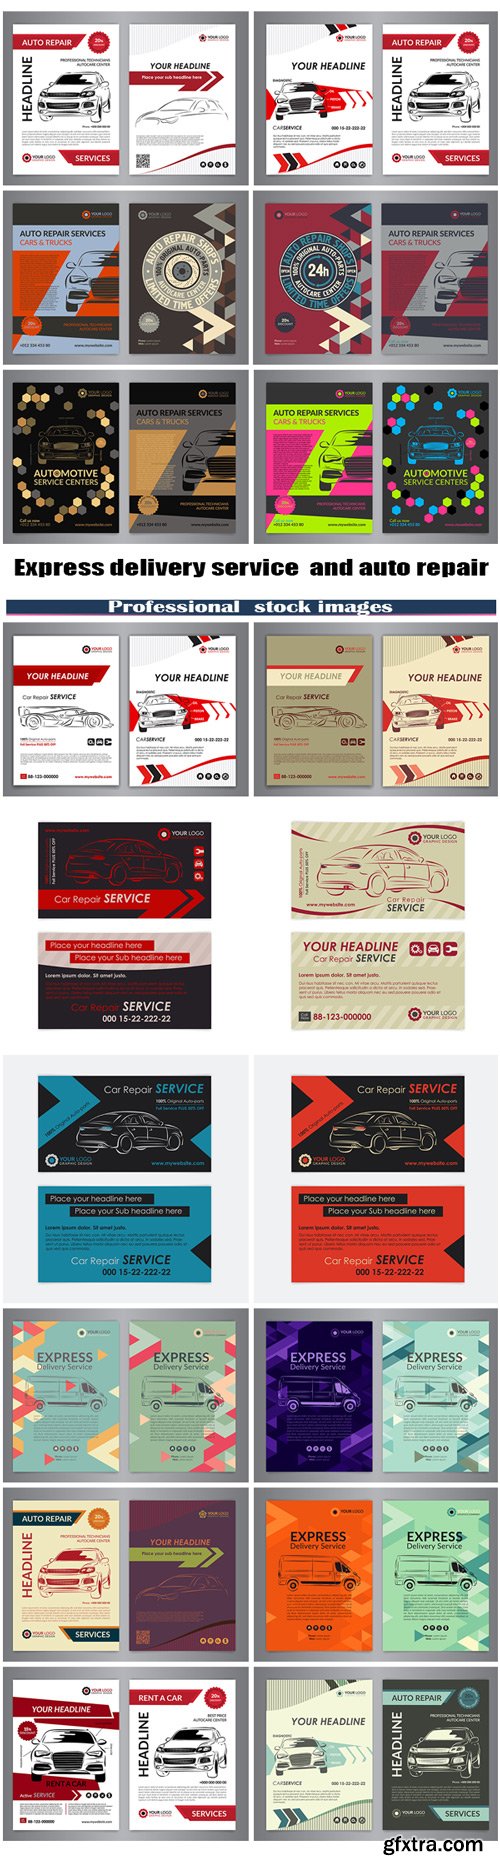 Express delivery service and auto repair business layout templates